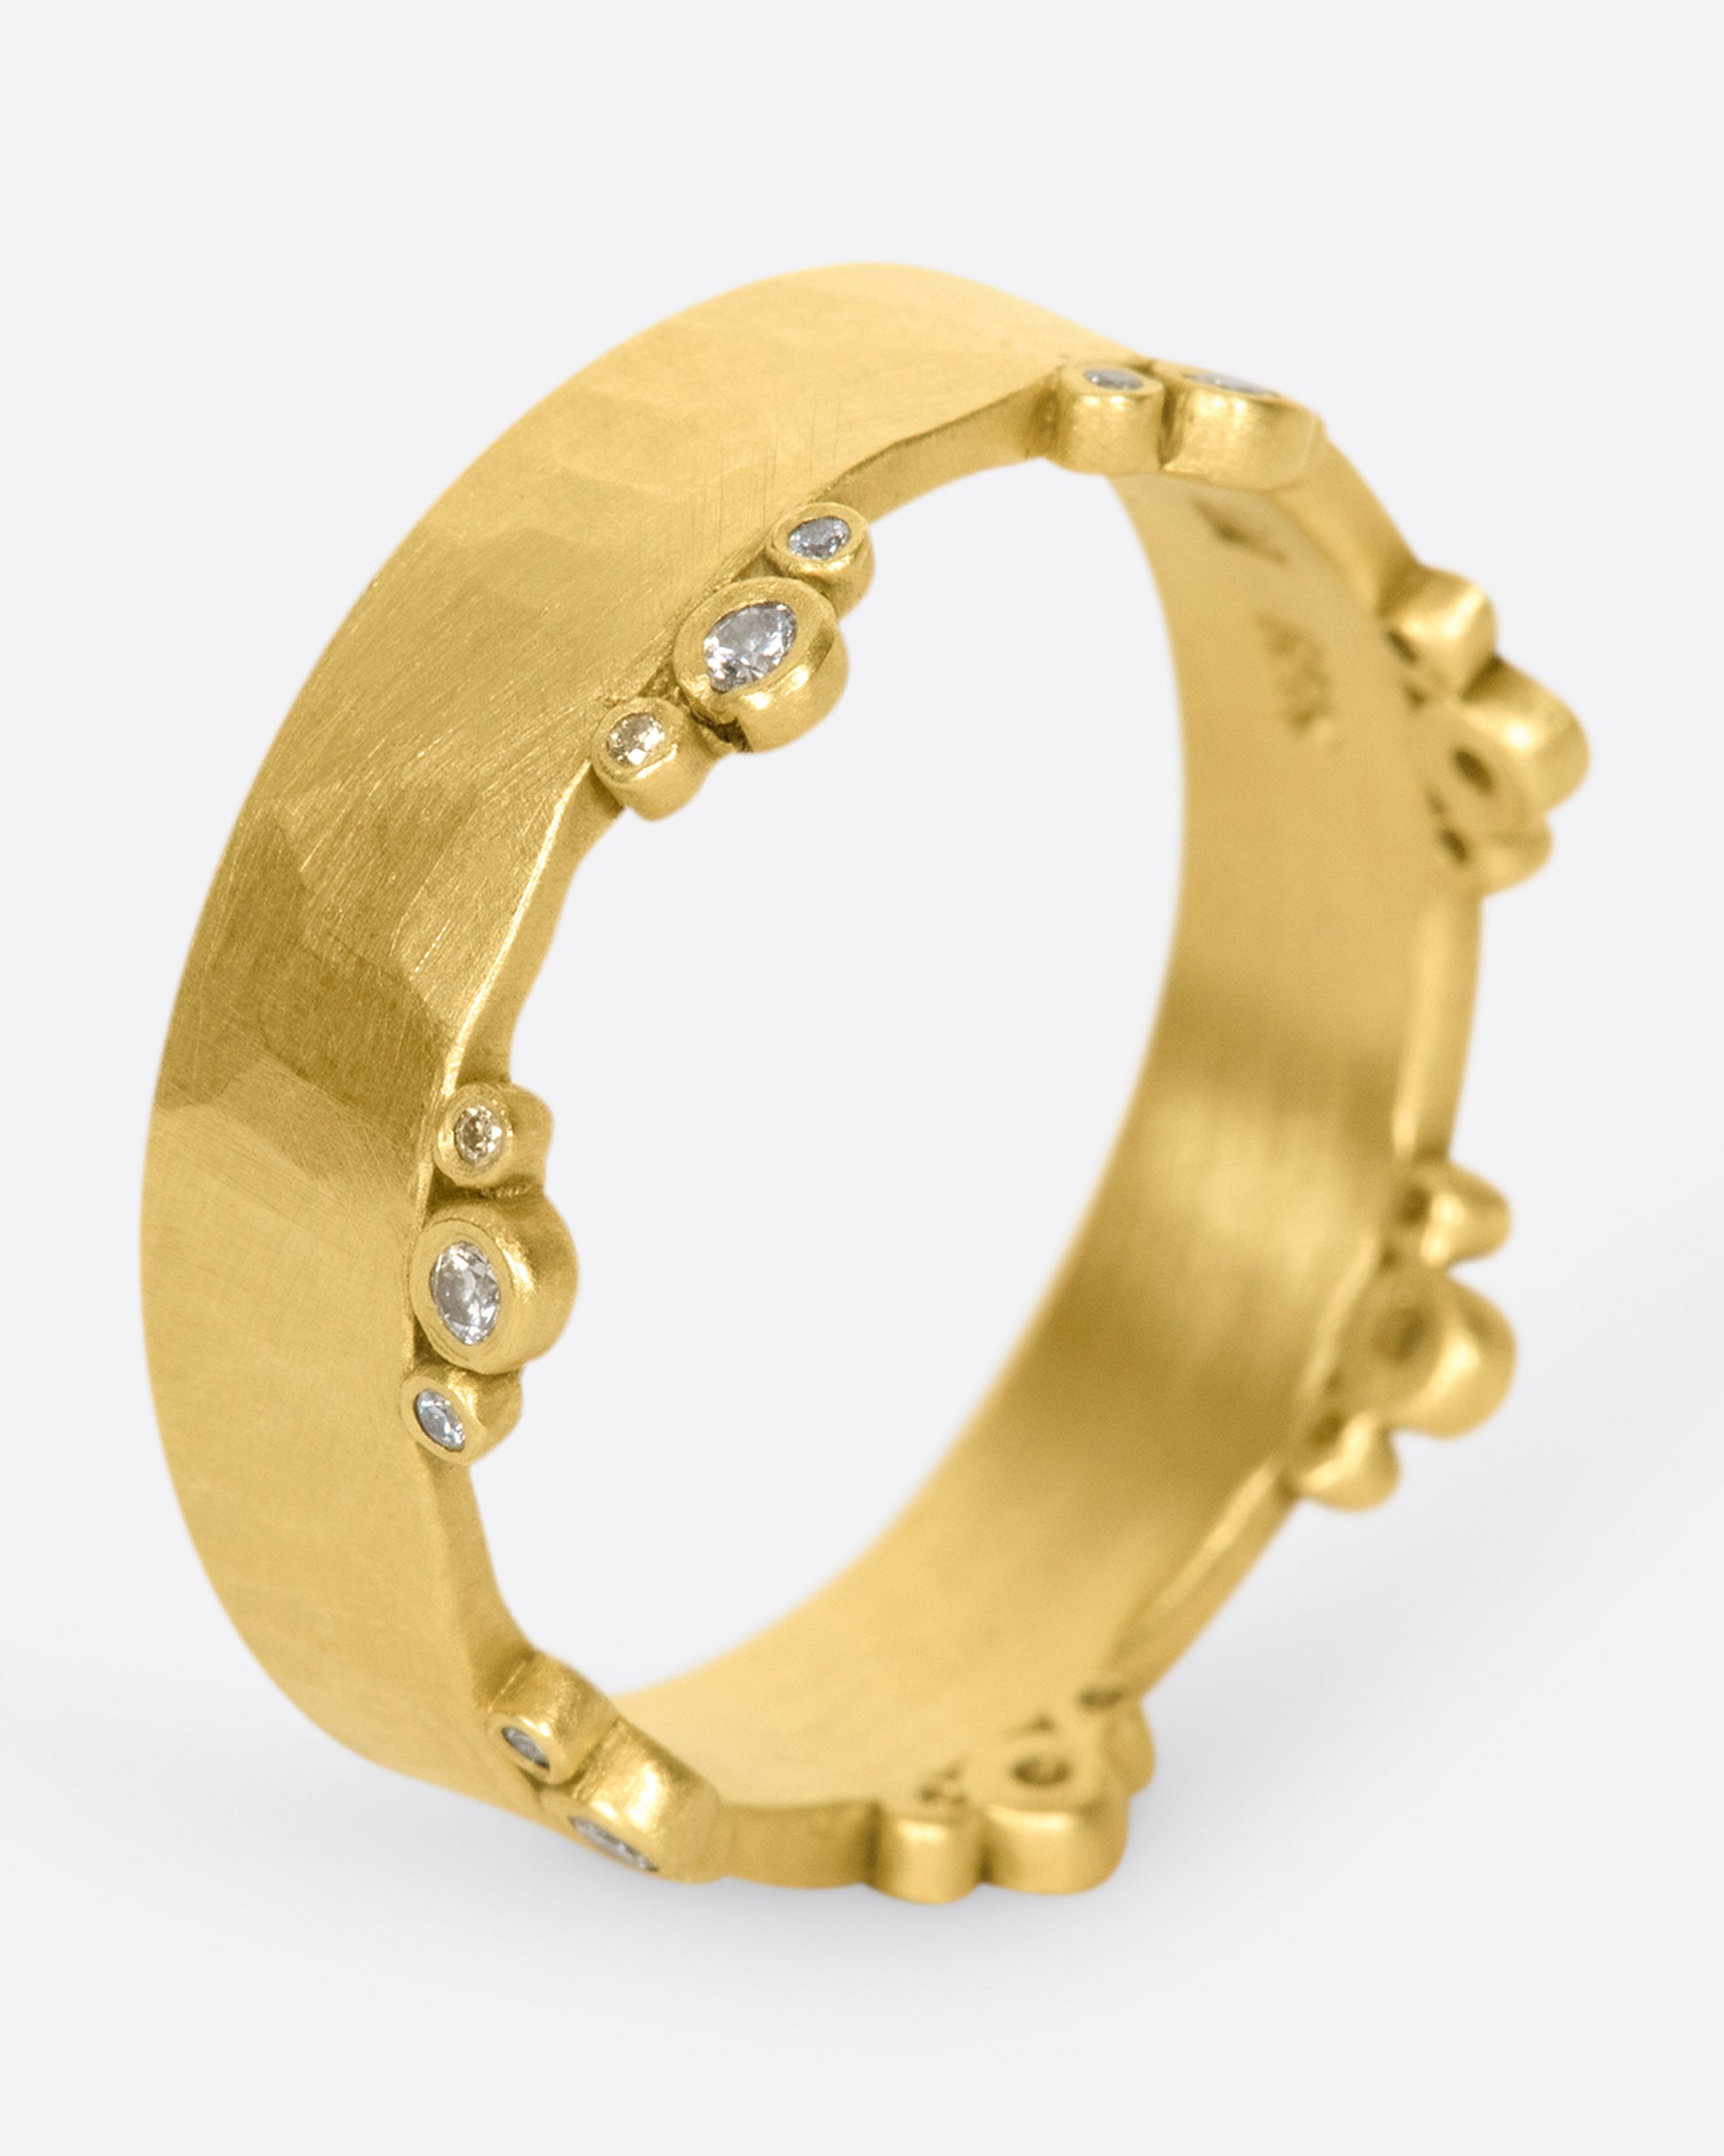 A wide, hammered, matte gold band with stations of diamonds along one edge.